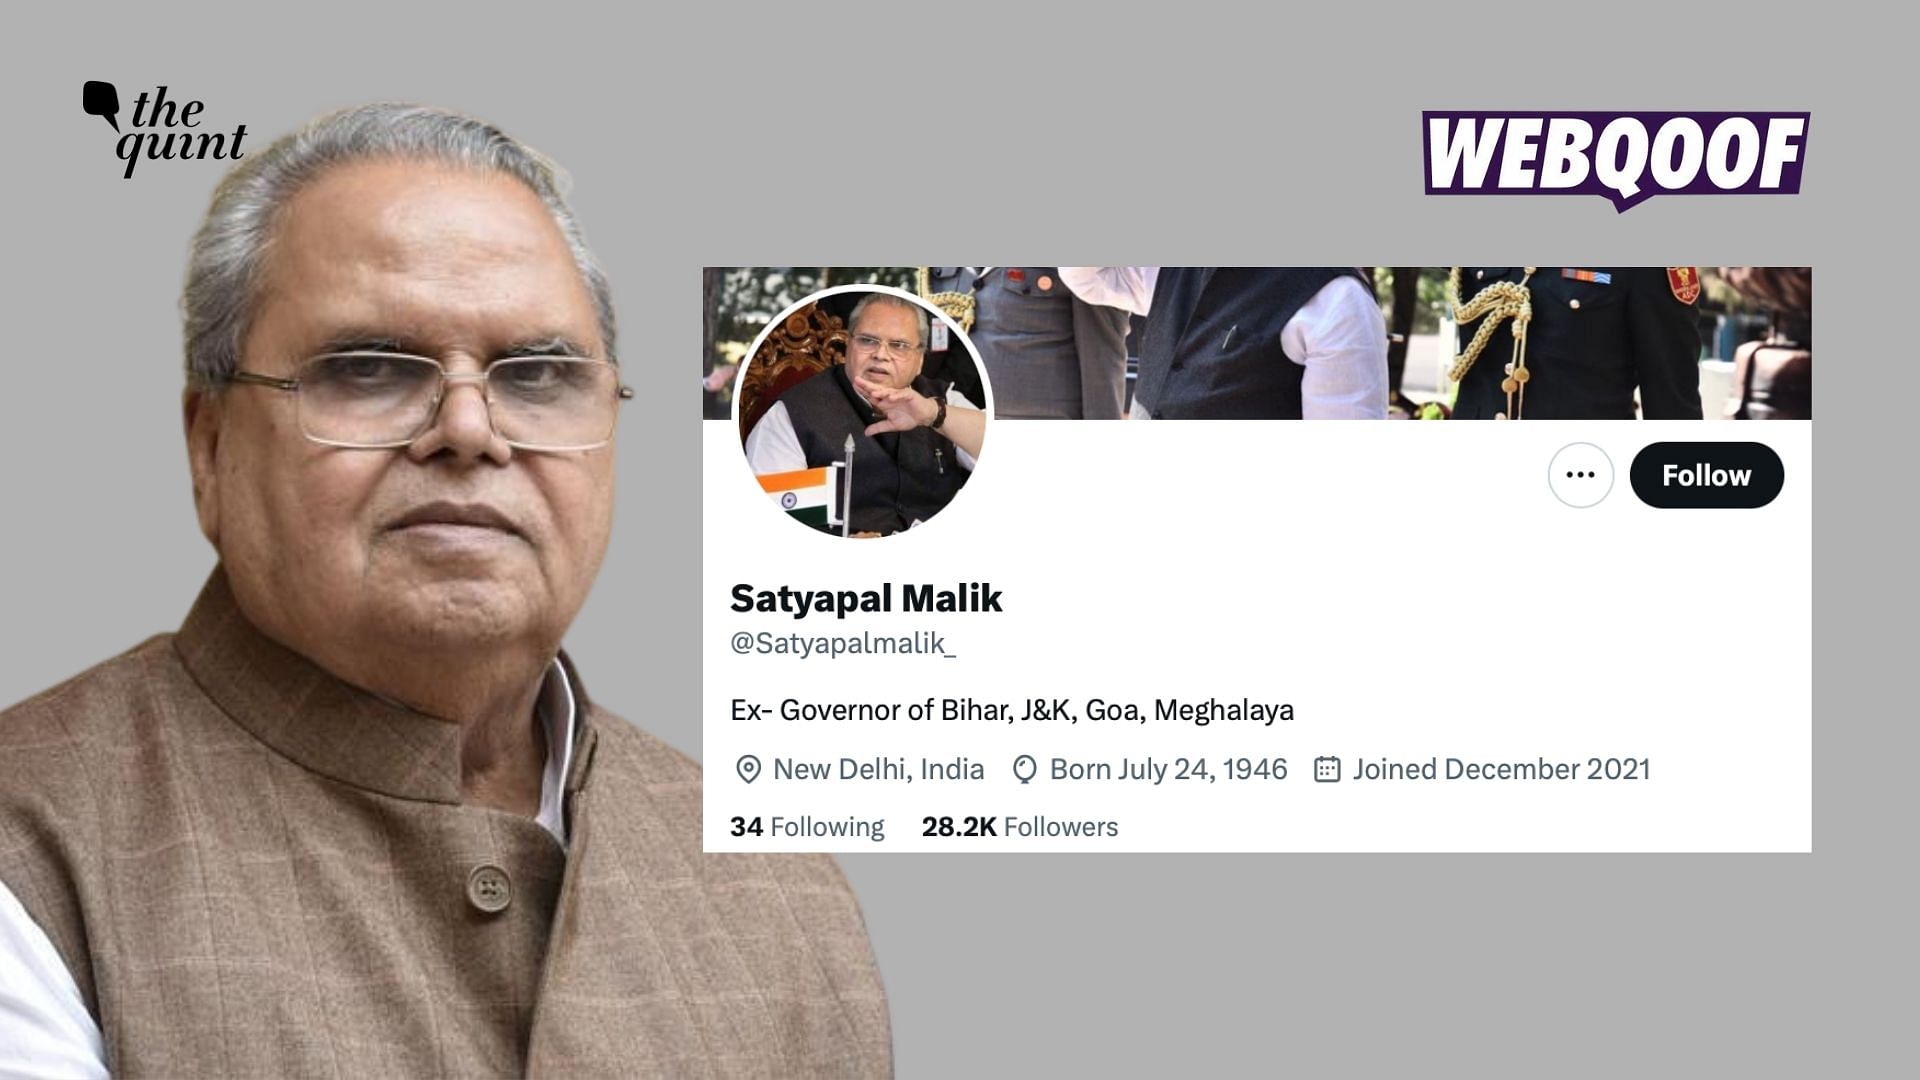 <div class="paragraphs"><p>The Twitter account with the handle '@Satyapalmalik_' is impersonating Satyapal Malik.</p></div>